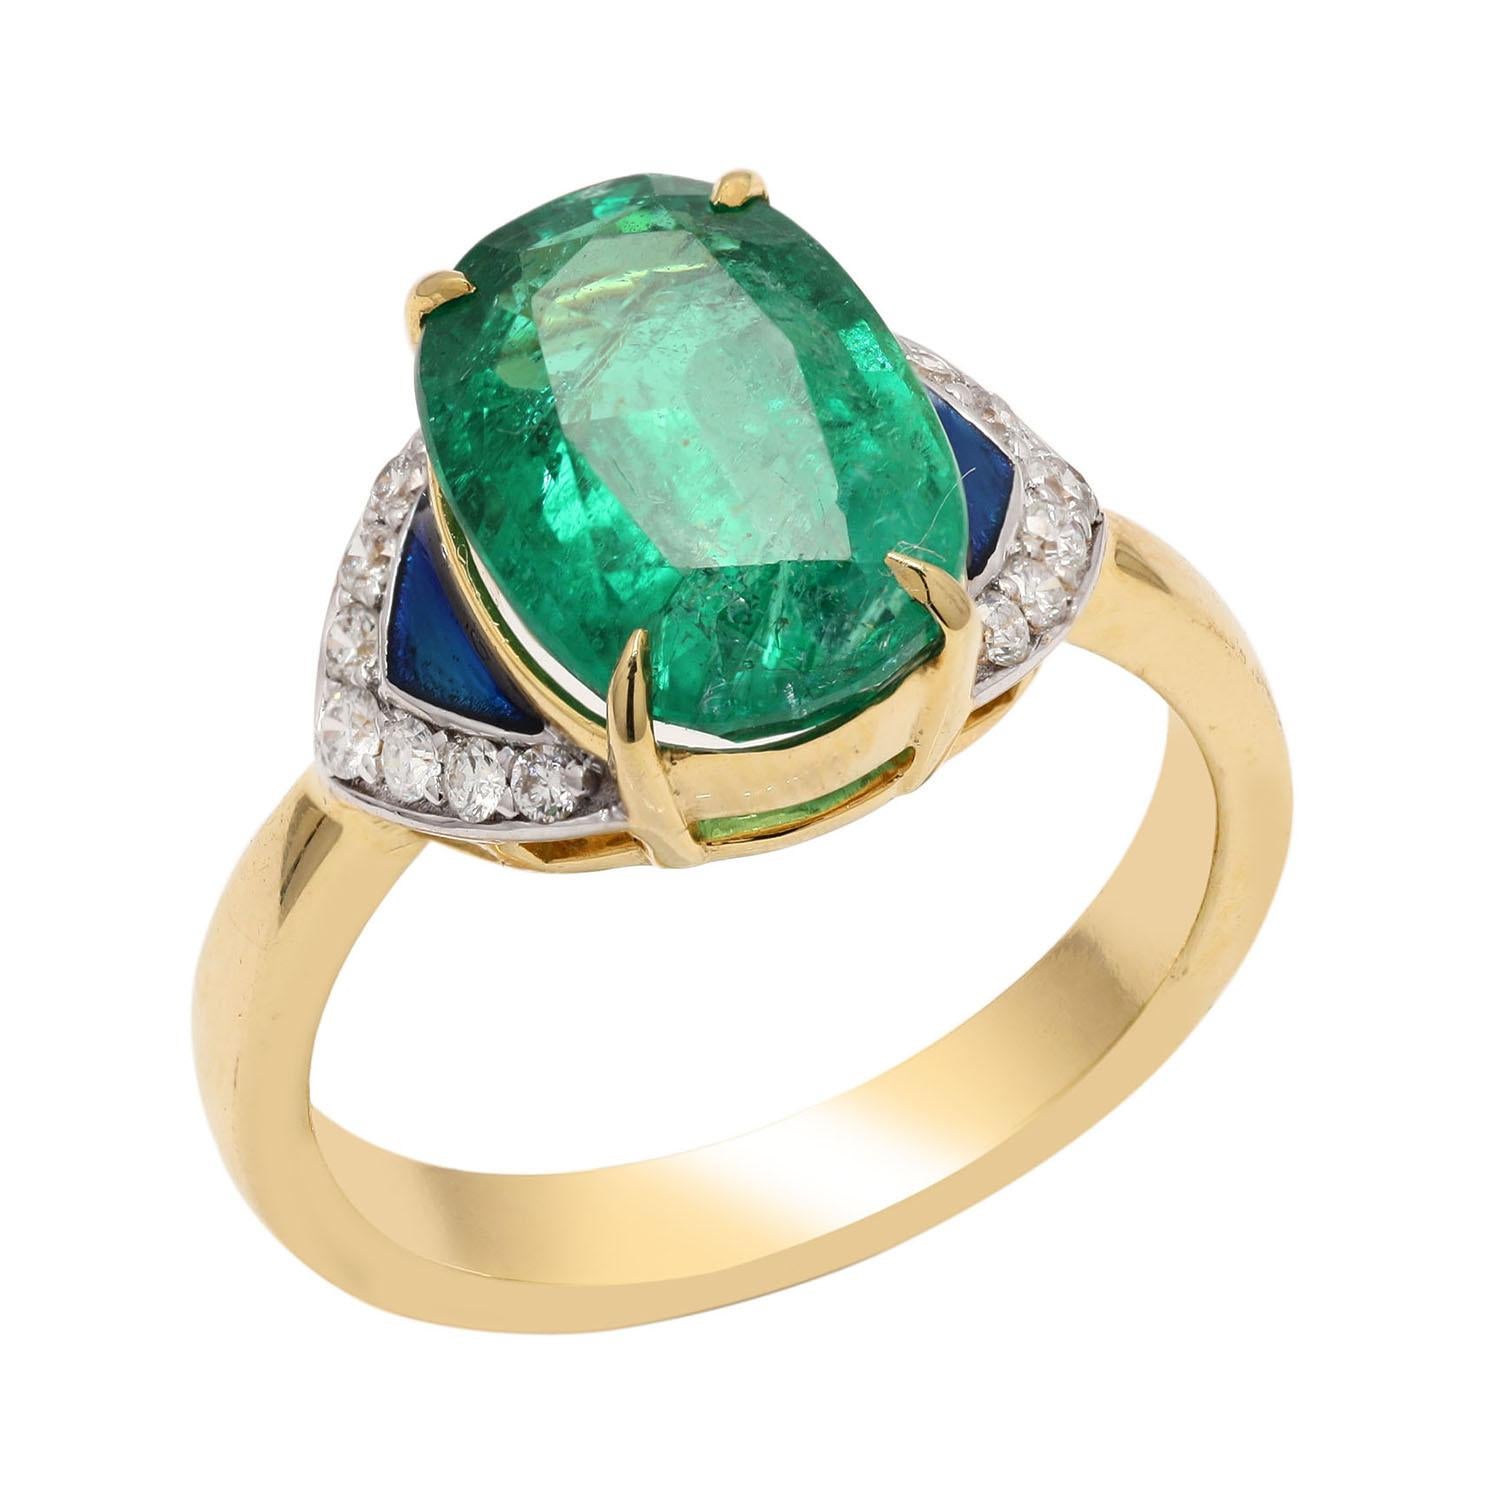 Oval Cut Zambian Oval Emerald Cocktail Ring with Diamonds Made in 18k Yellow Gold For Sale